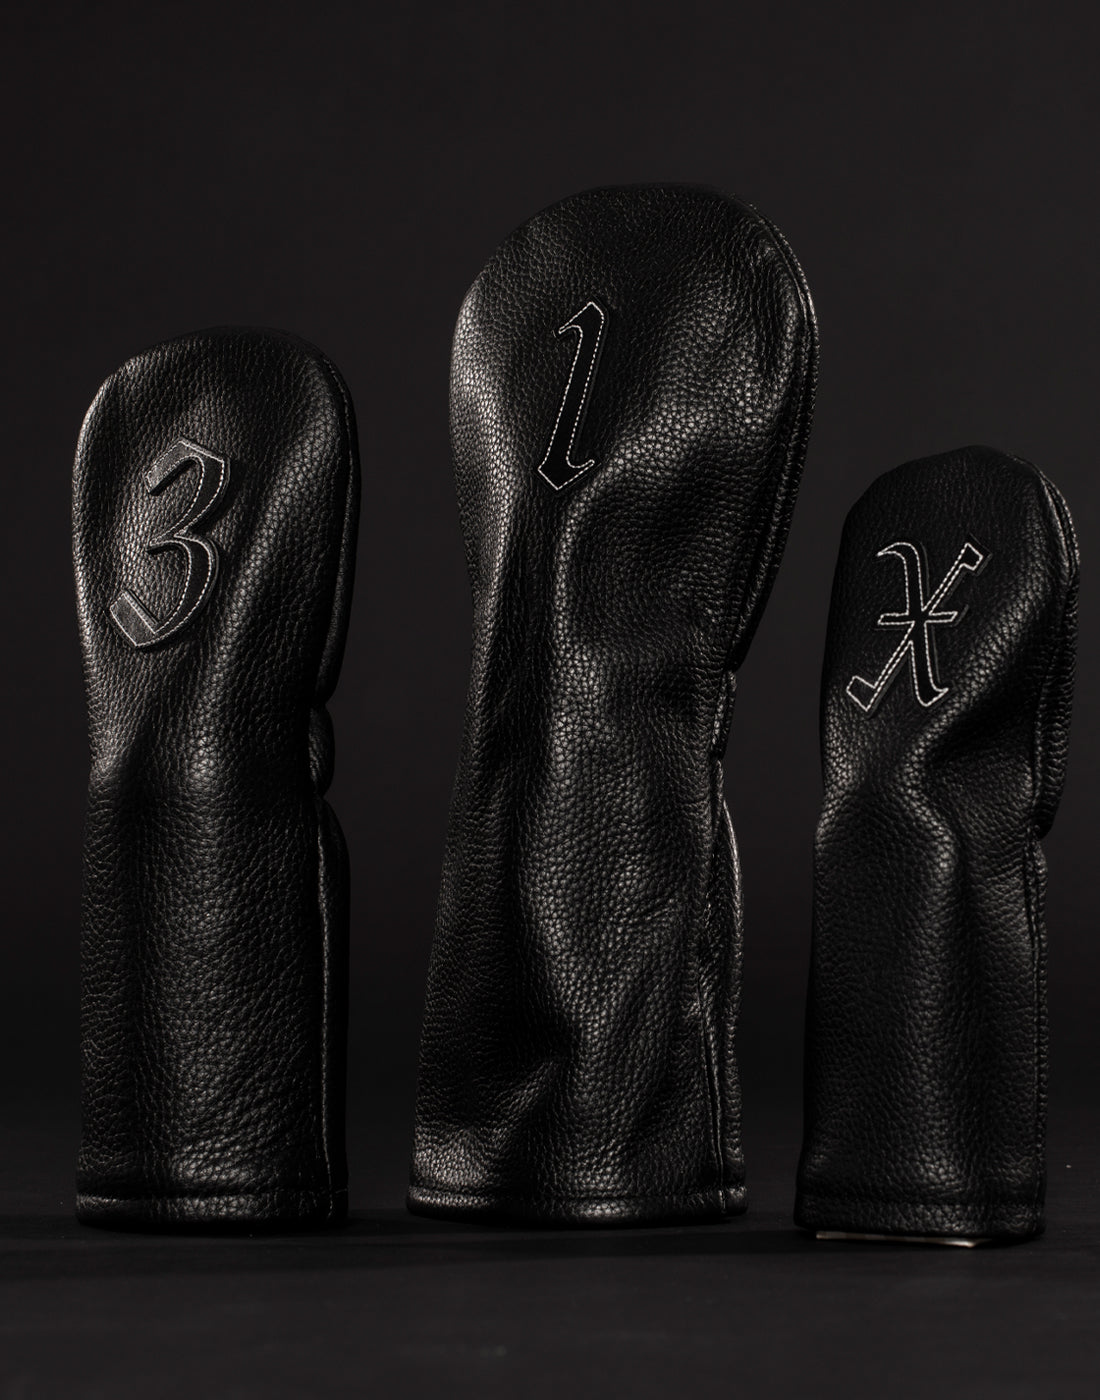 Three black golf headcovers propped upright in black studio